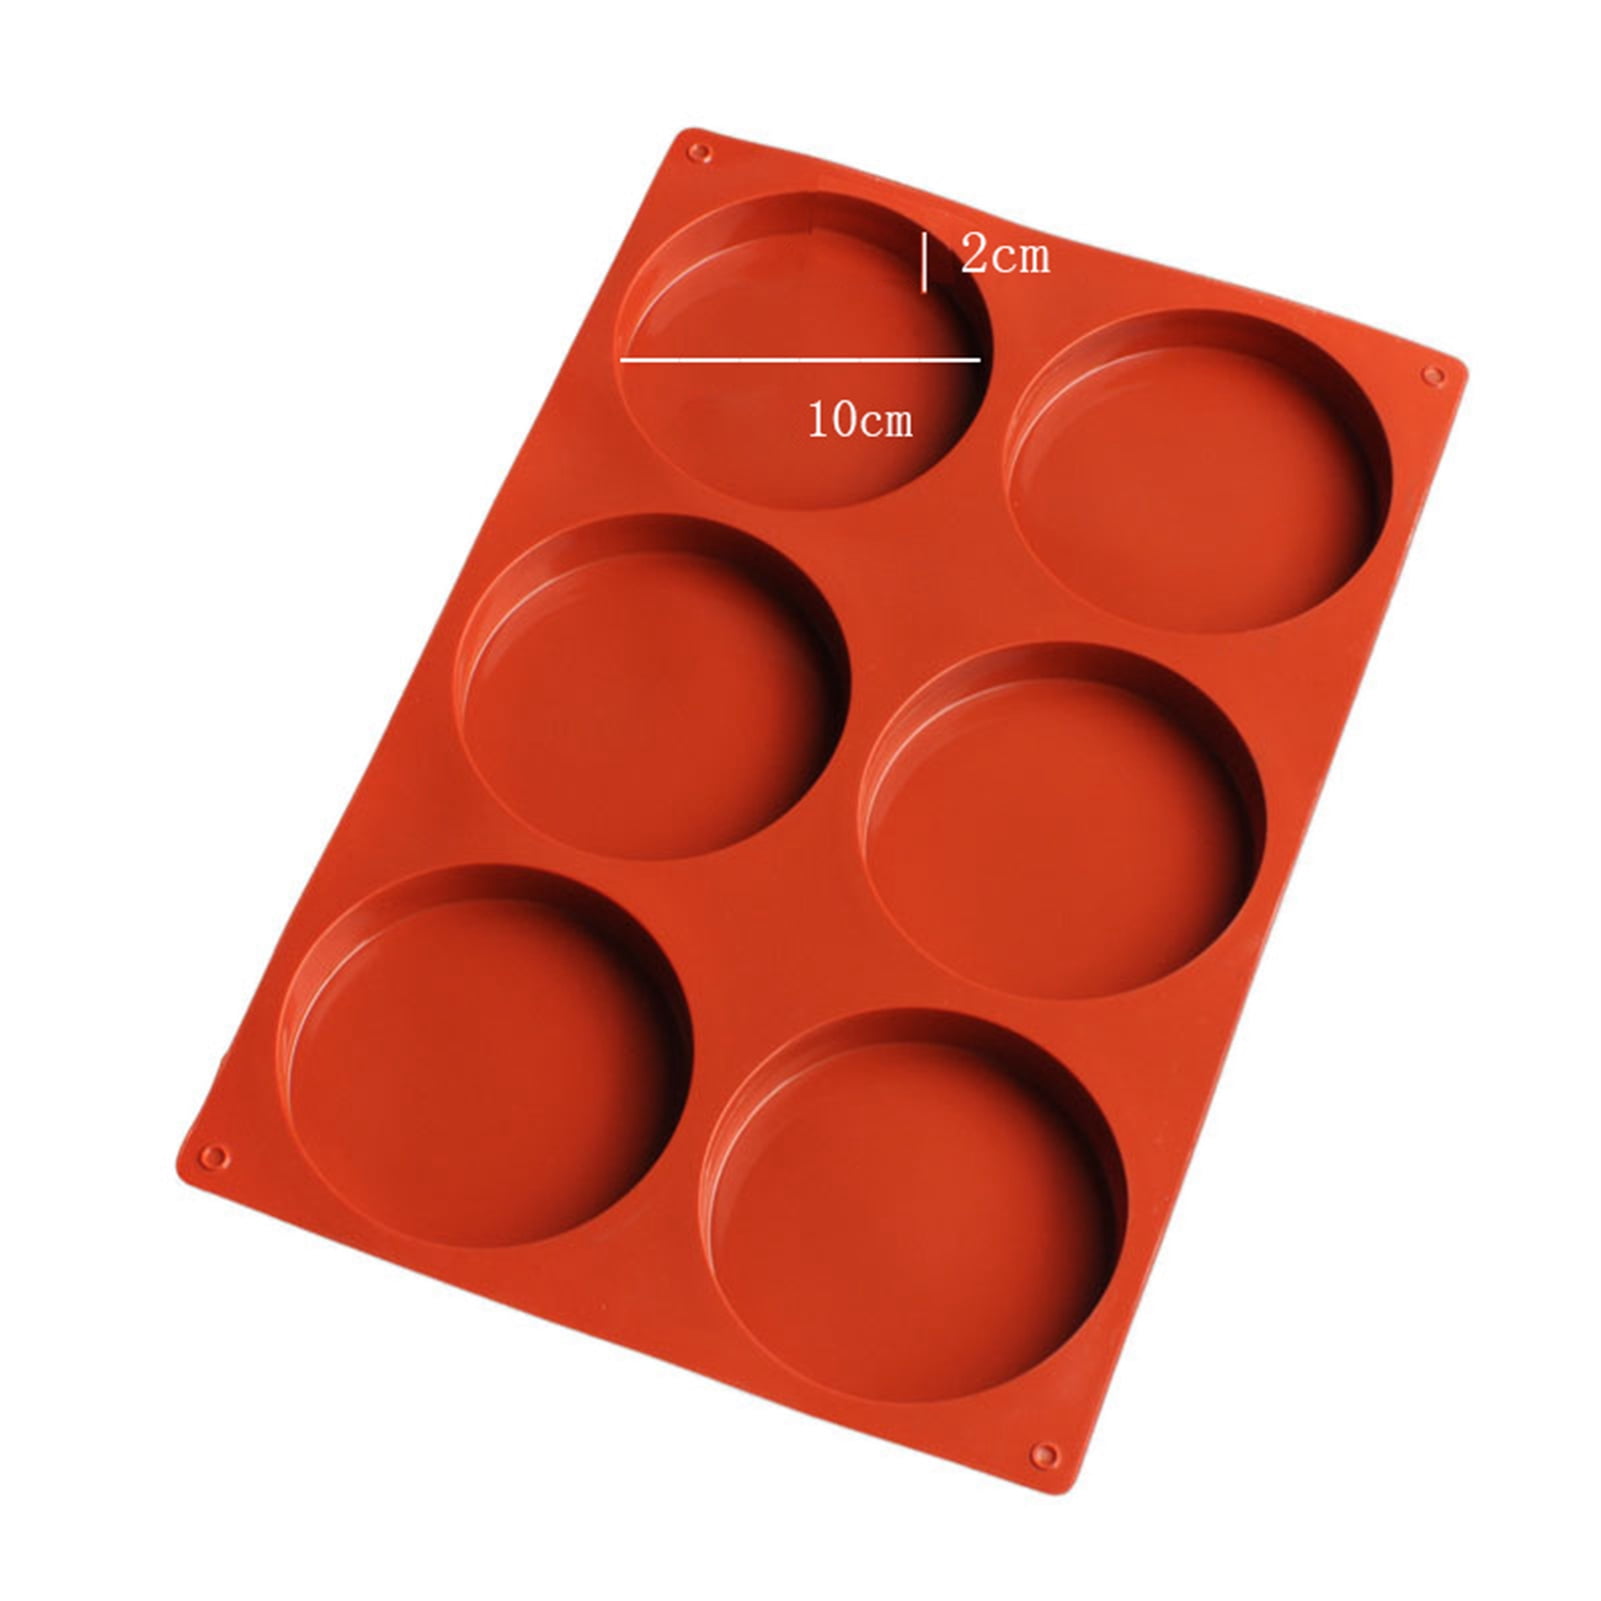 Aebor 2 Pcs Silicone Baking Molds, 8 Cavity Silicone Portion Cake Mold,  Triangle Cavity Cake Pan, for Oven and Instant Pot DIY Baking Tool(Orange